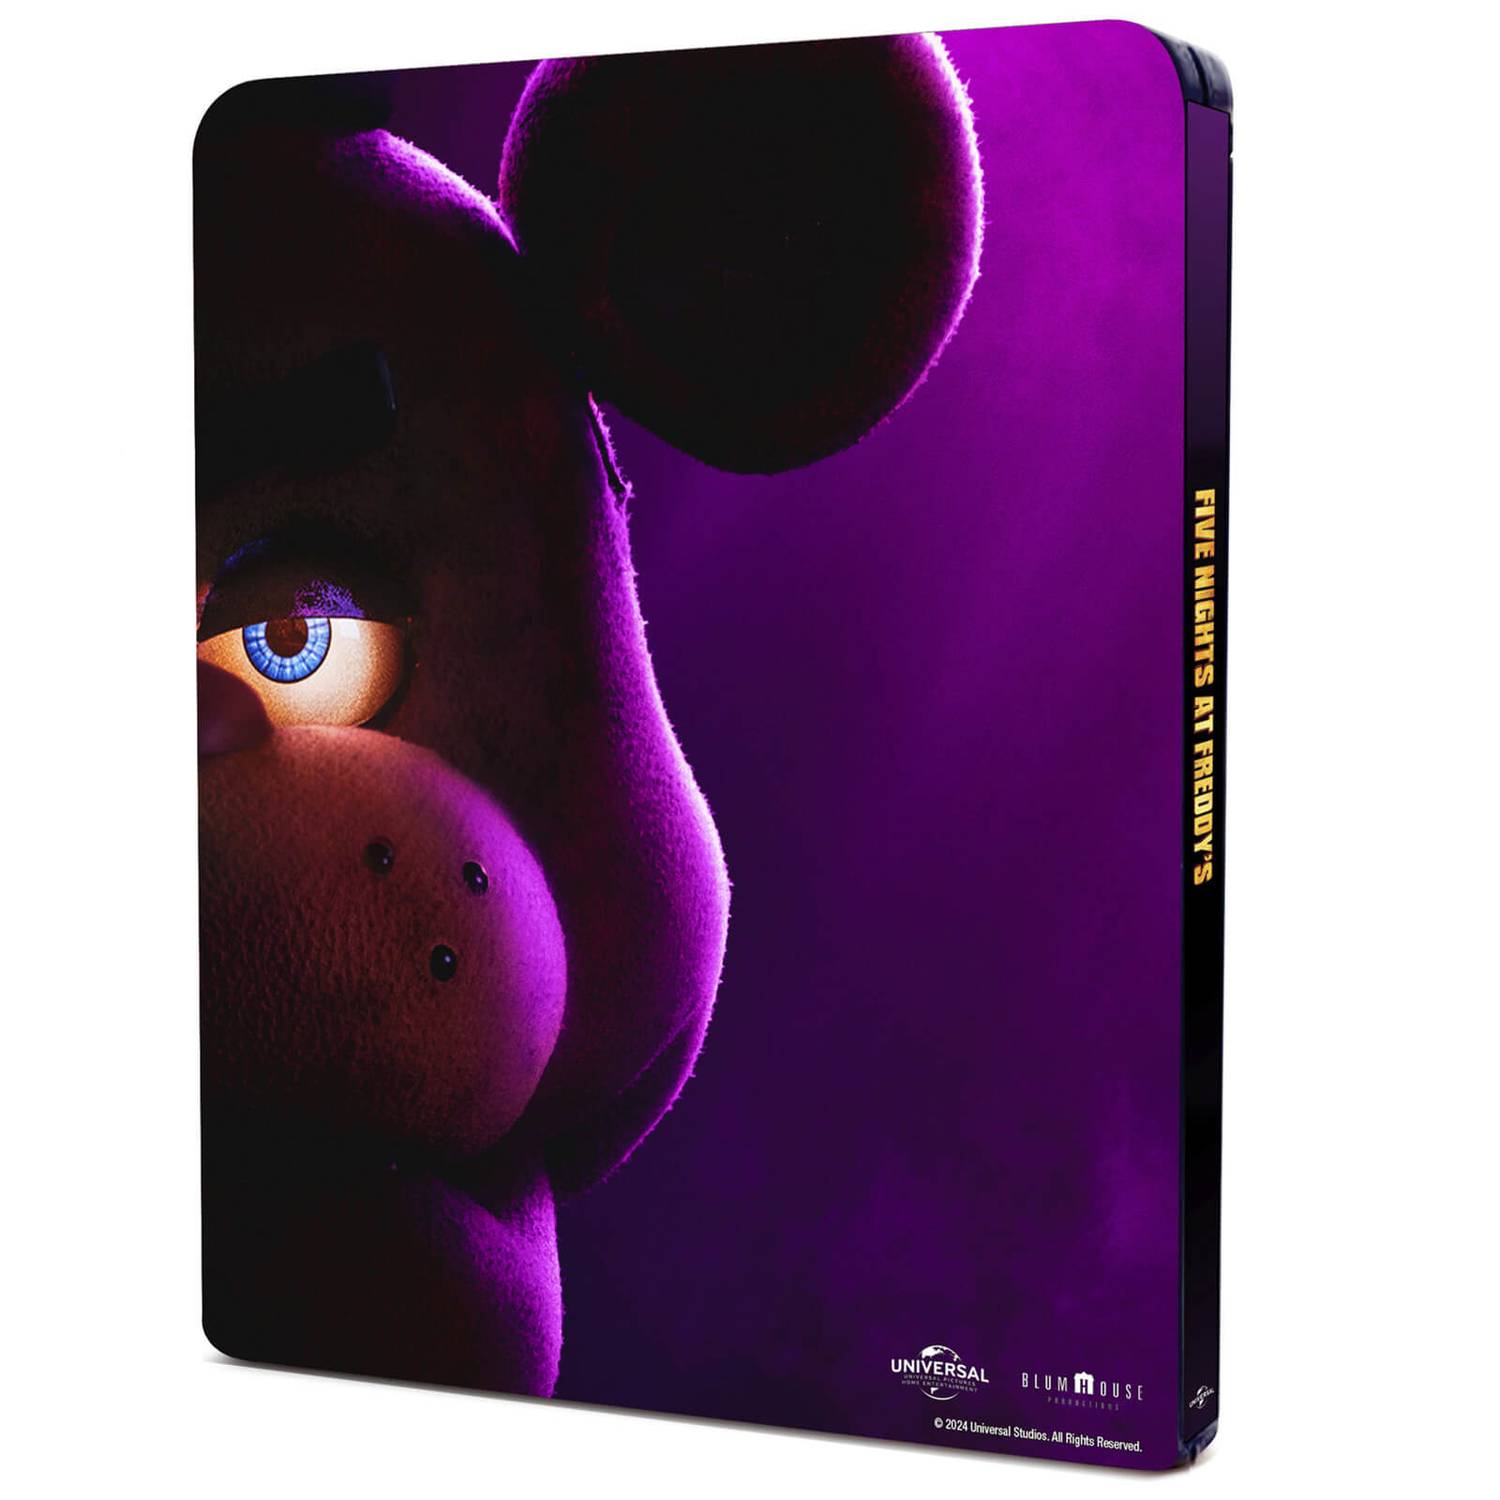 Five Nights at Freddy's 4K UHD Steelbook - Collector's Editions